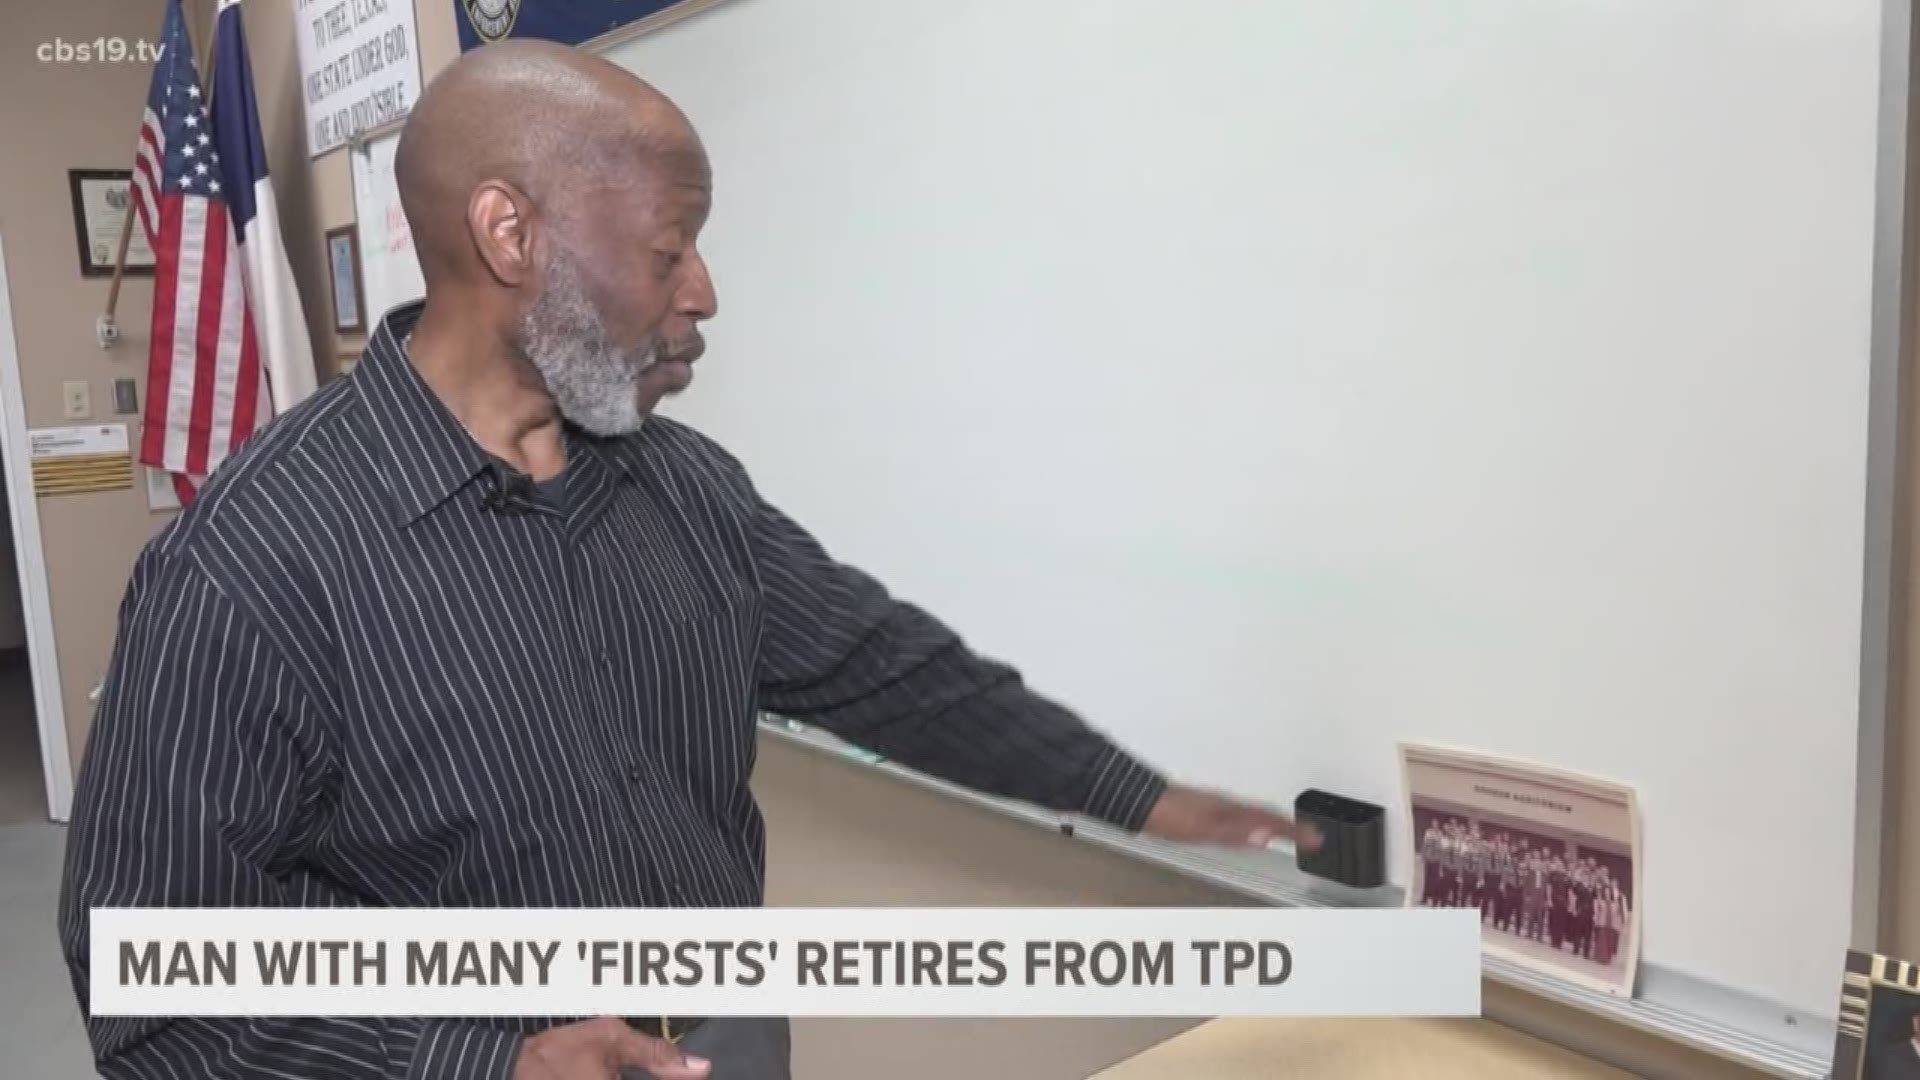 Herbert Hayter, the first African American supervisor with the Tyler Police Department announced his retirement.